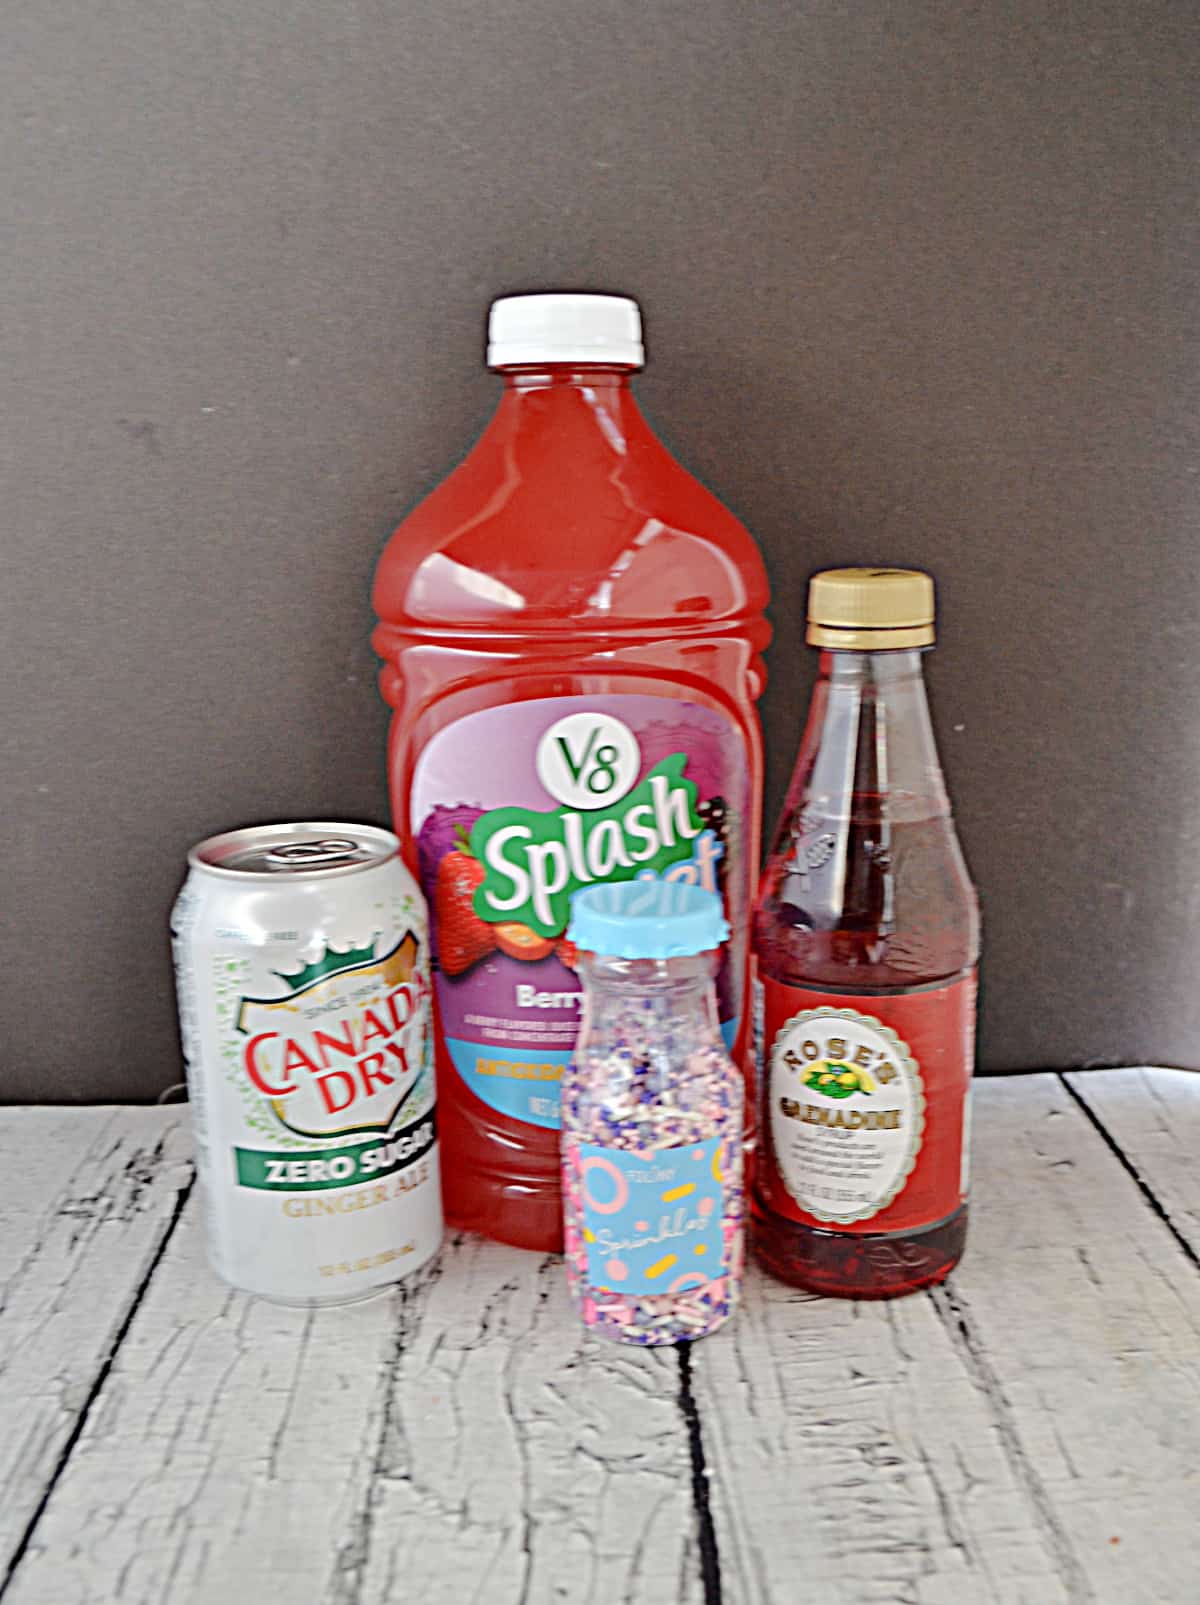 A jug of berry juice, a bottle of grenadine, a bottle of sprinkles, and a can of ginger ale.